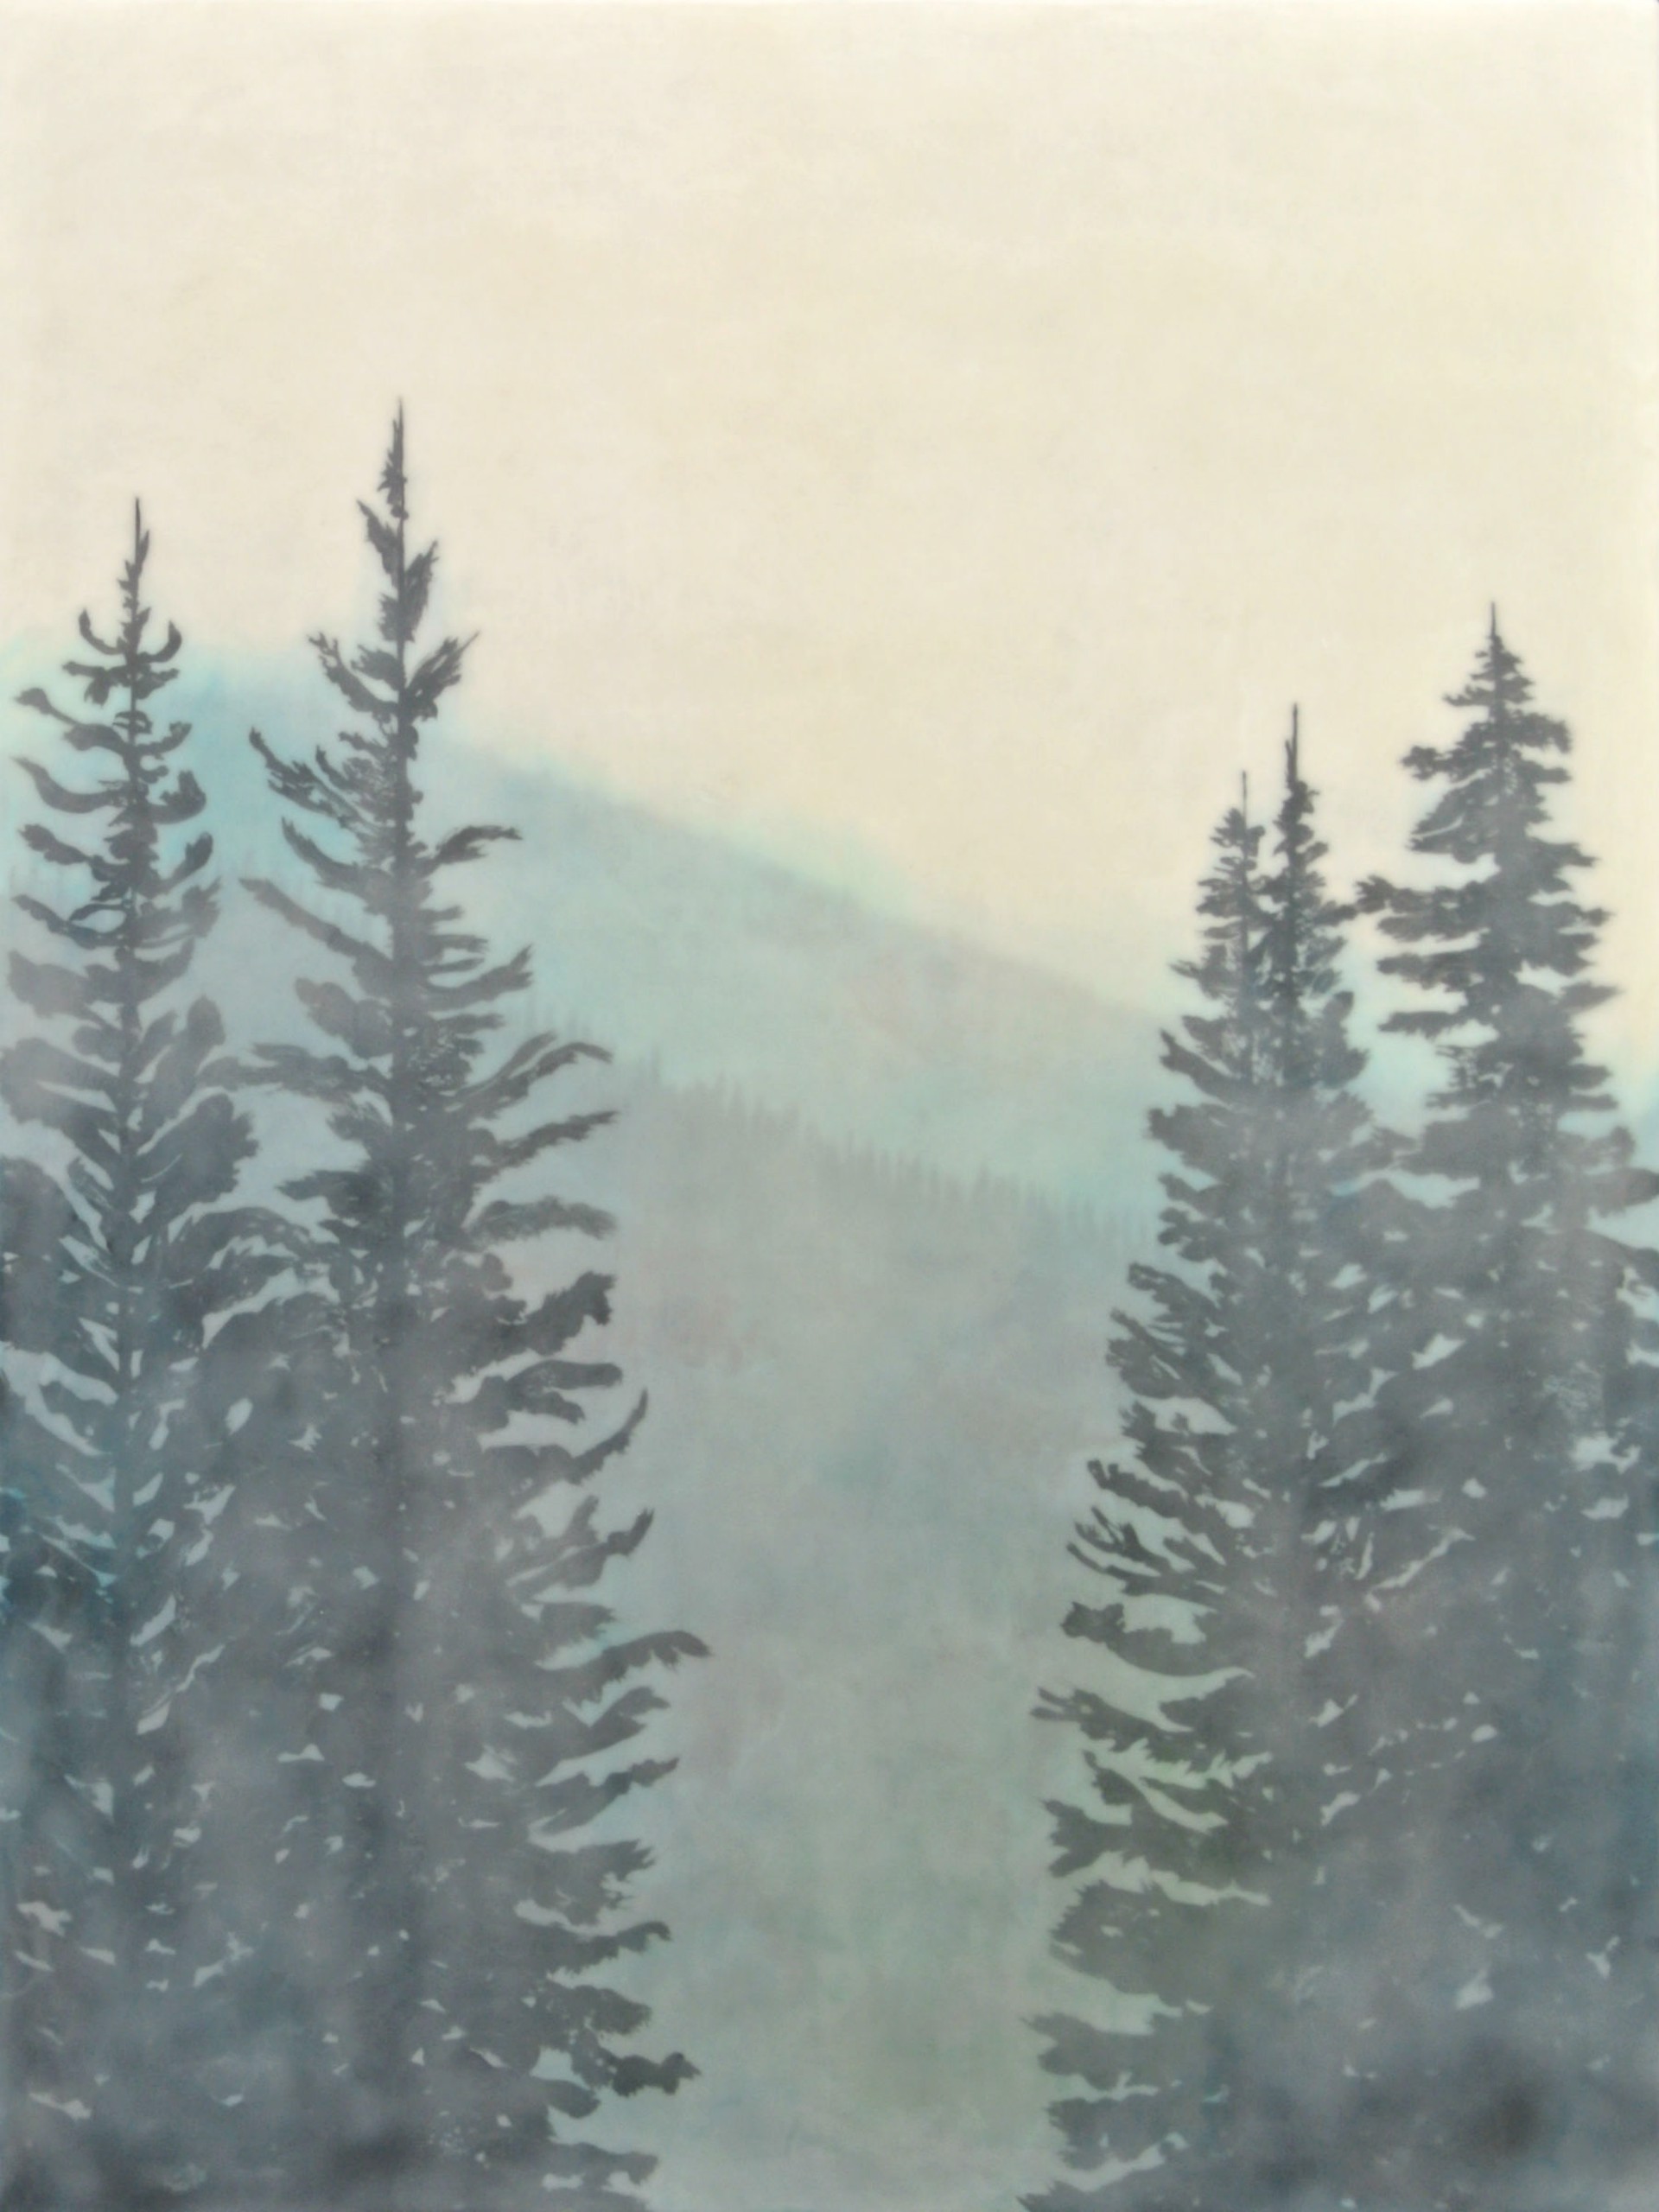 A Contemporary Encaustic Painting Featuring Mountain Landscape With Trees By Bridgette Meinhold, Available At Gallery Wild